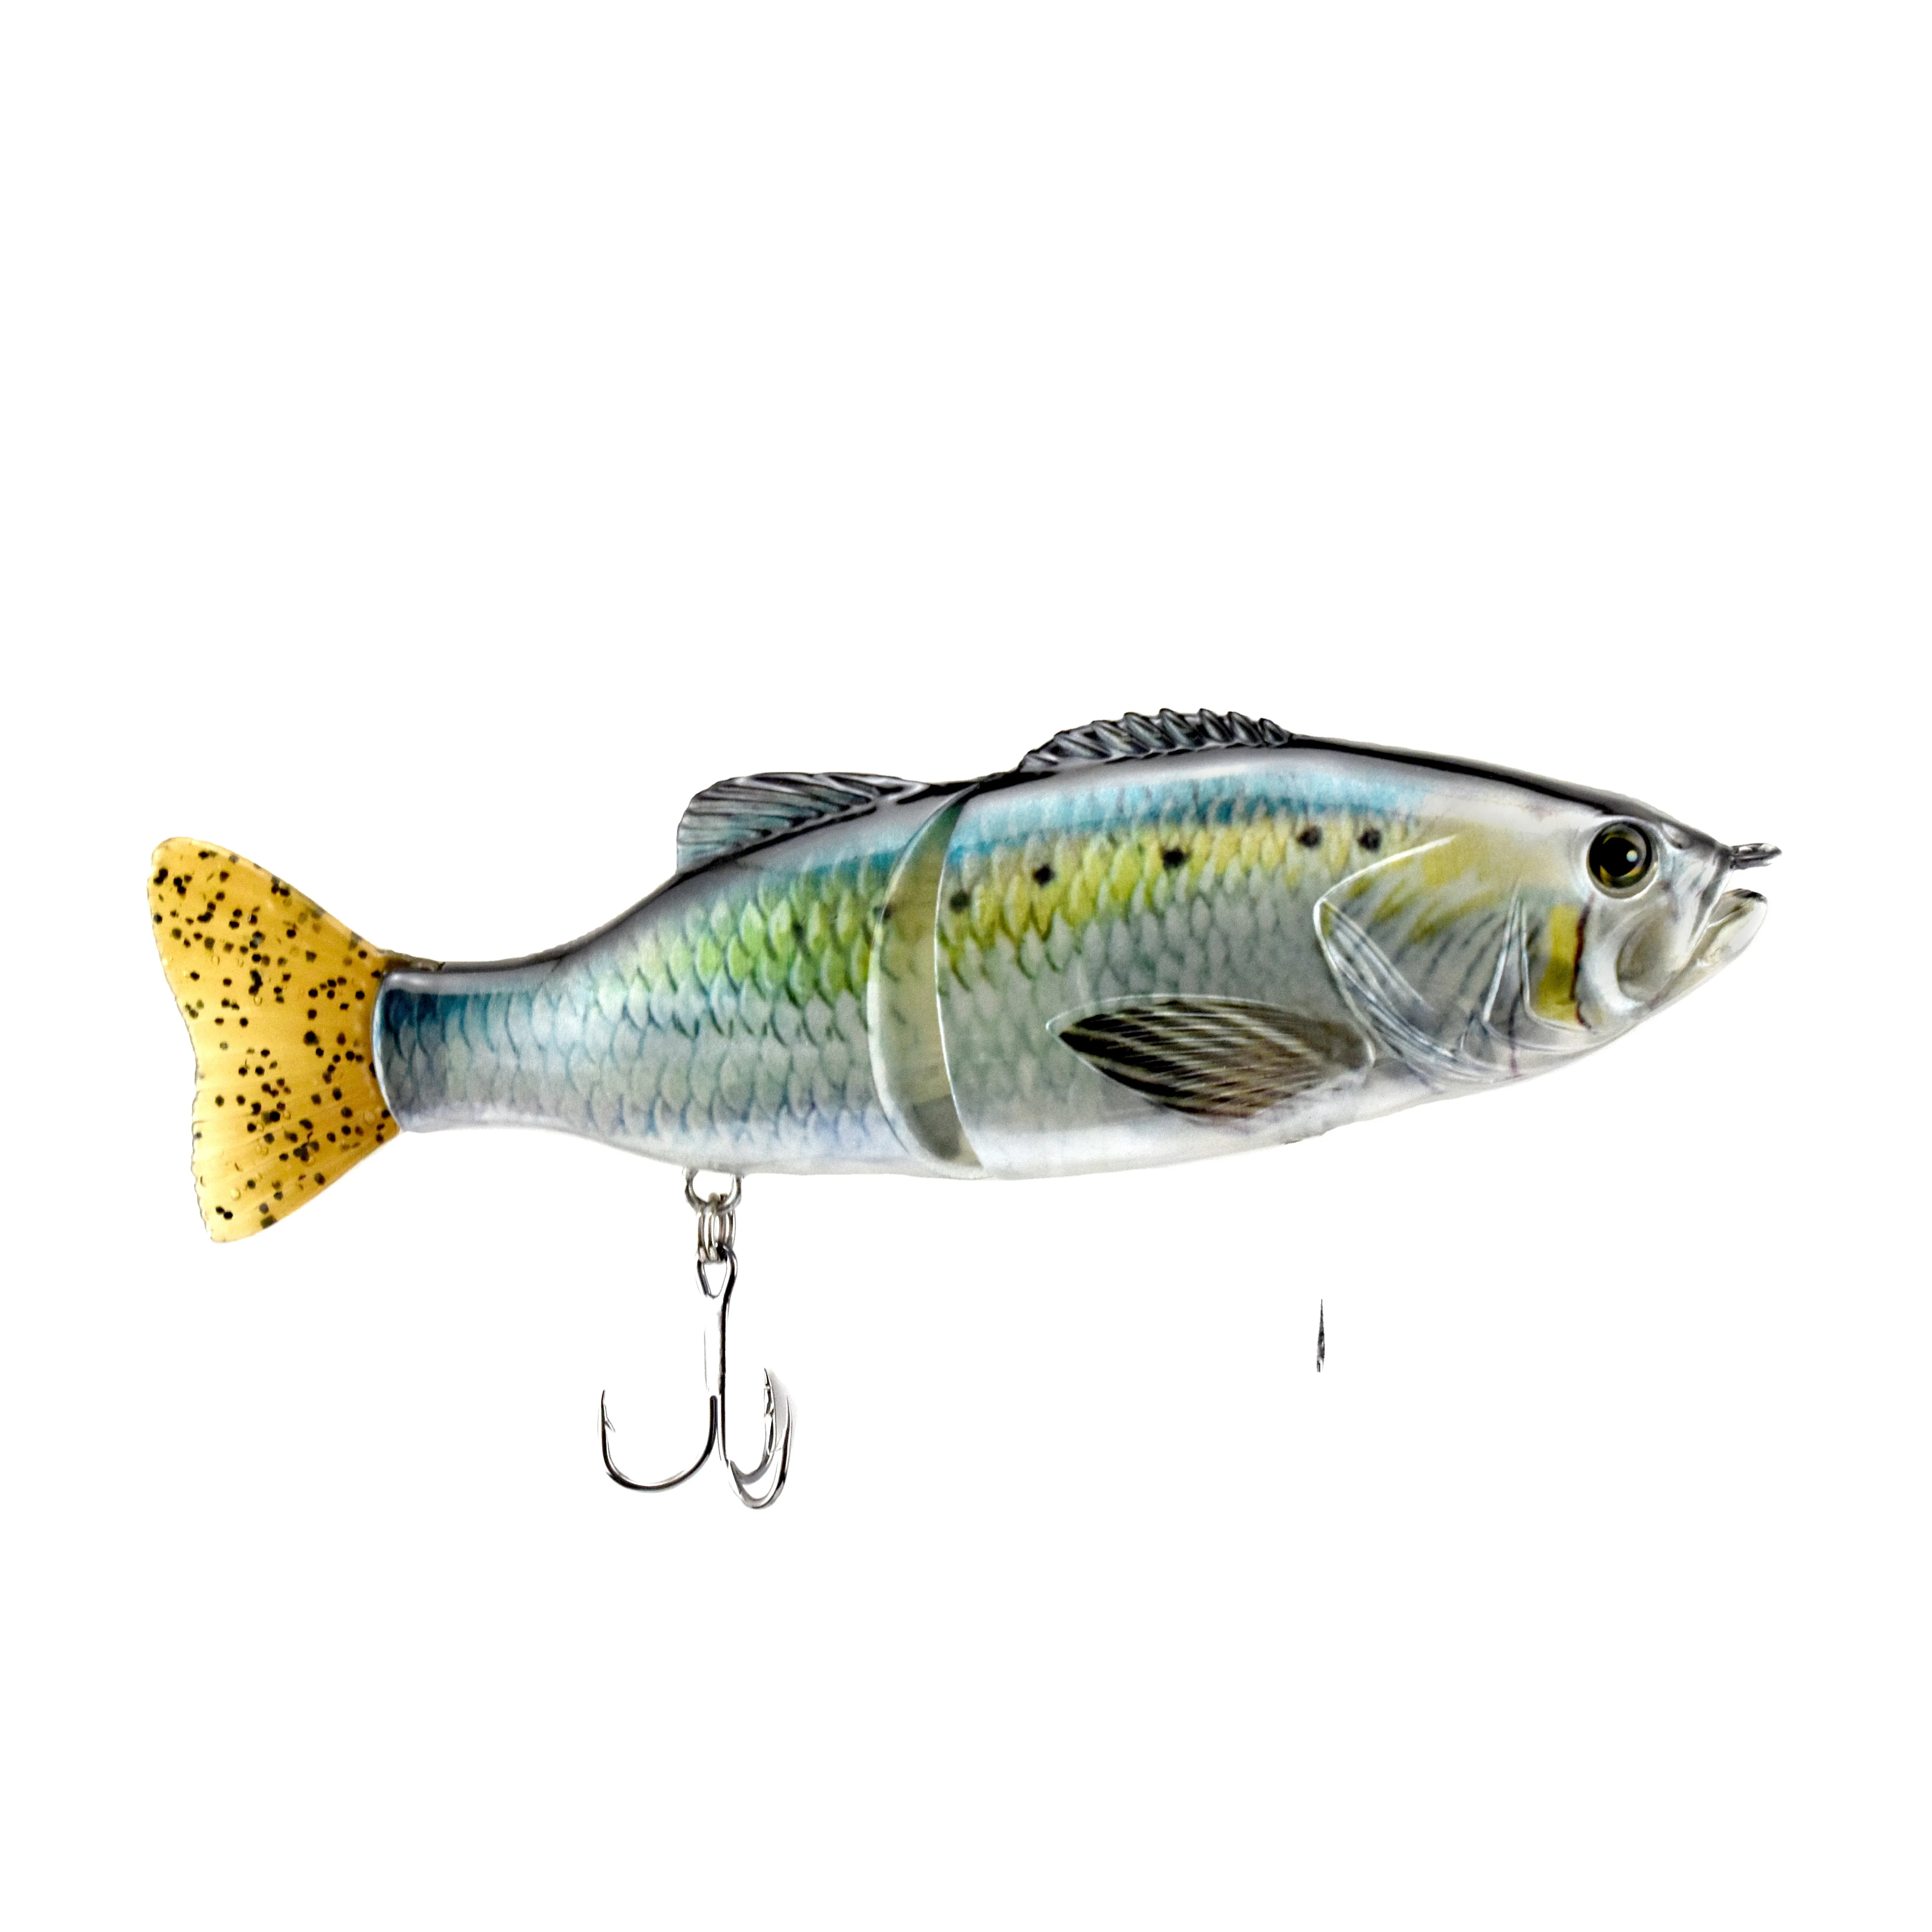 

two section big lures tackle factory oem Bluegill Glide Bait 7inch Trout Fishing Lures Artificial Hard Plastic Baits tackle, Realistic and natural